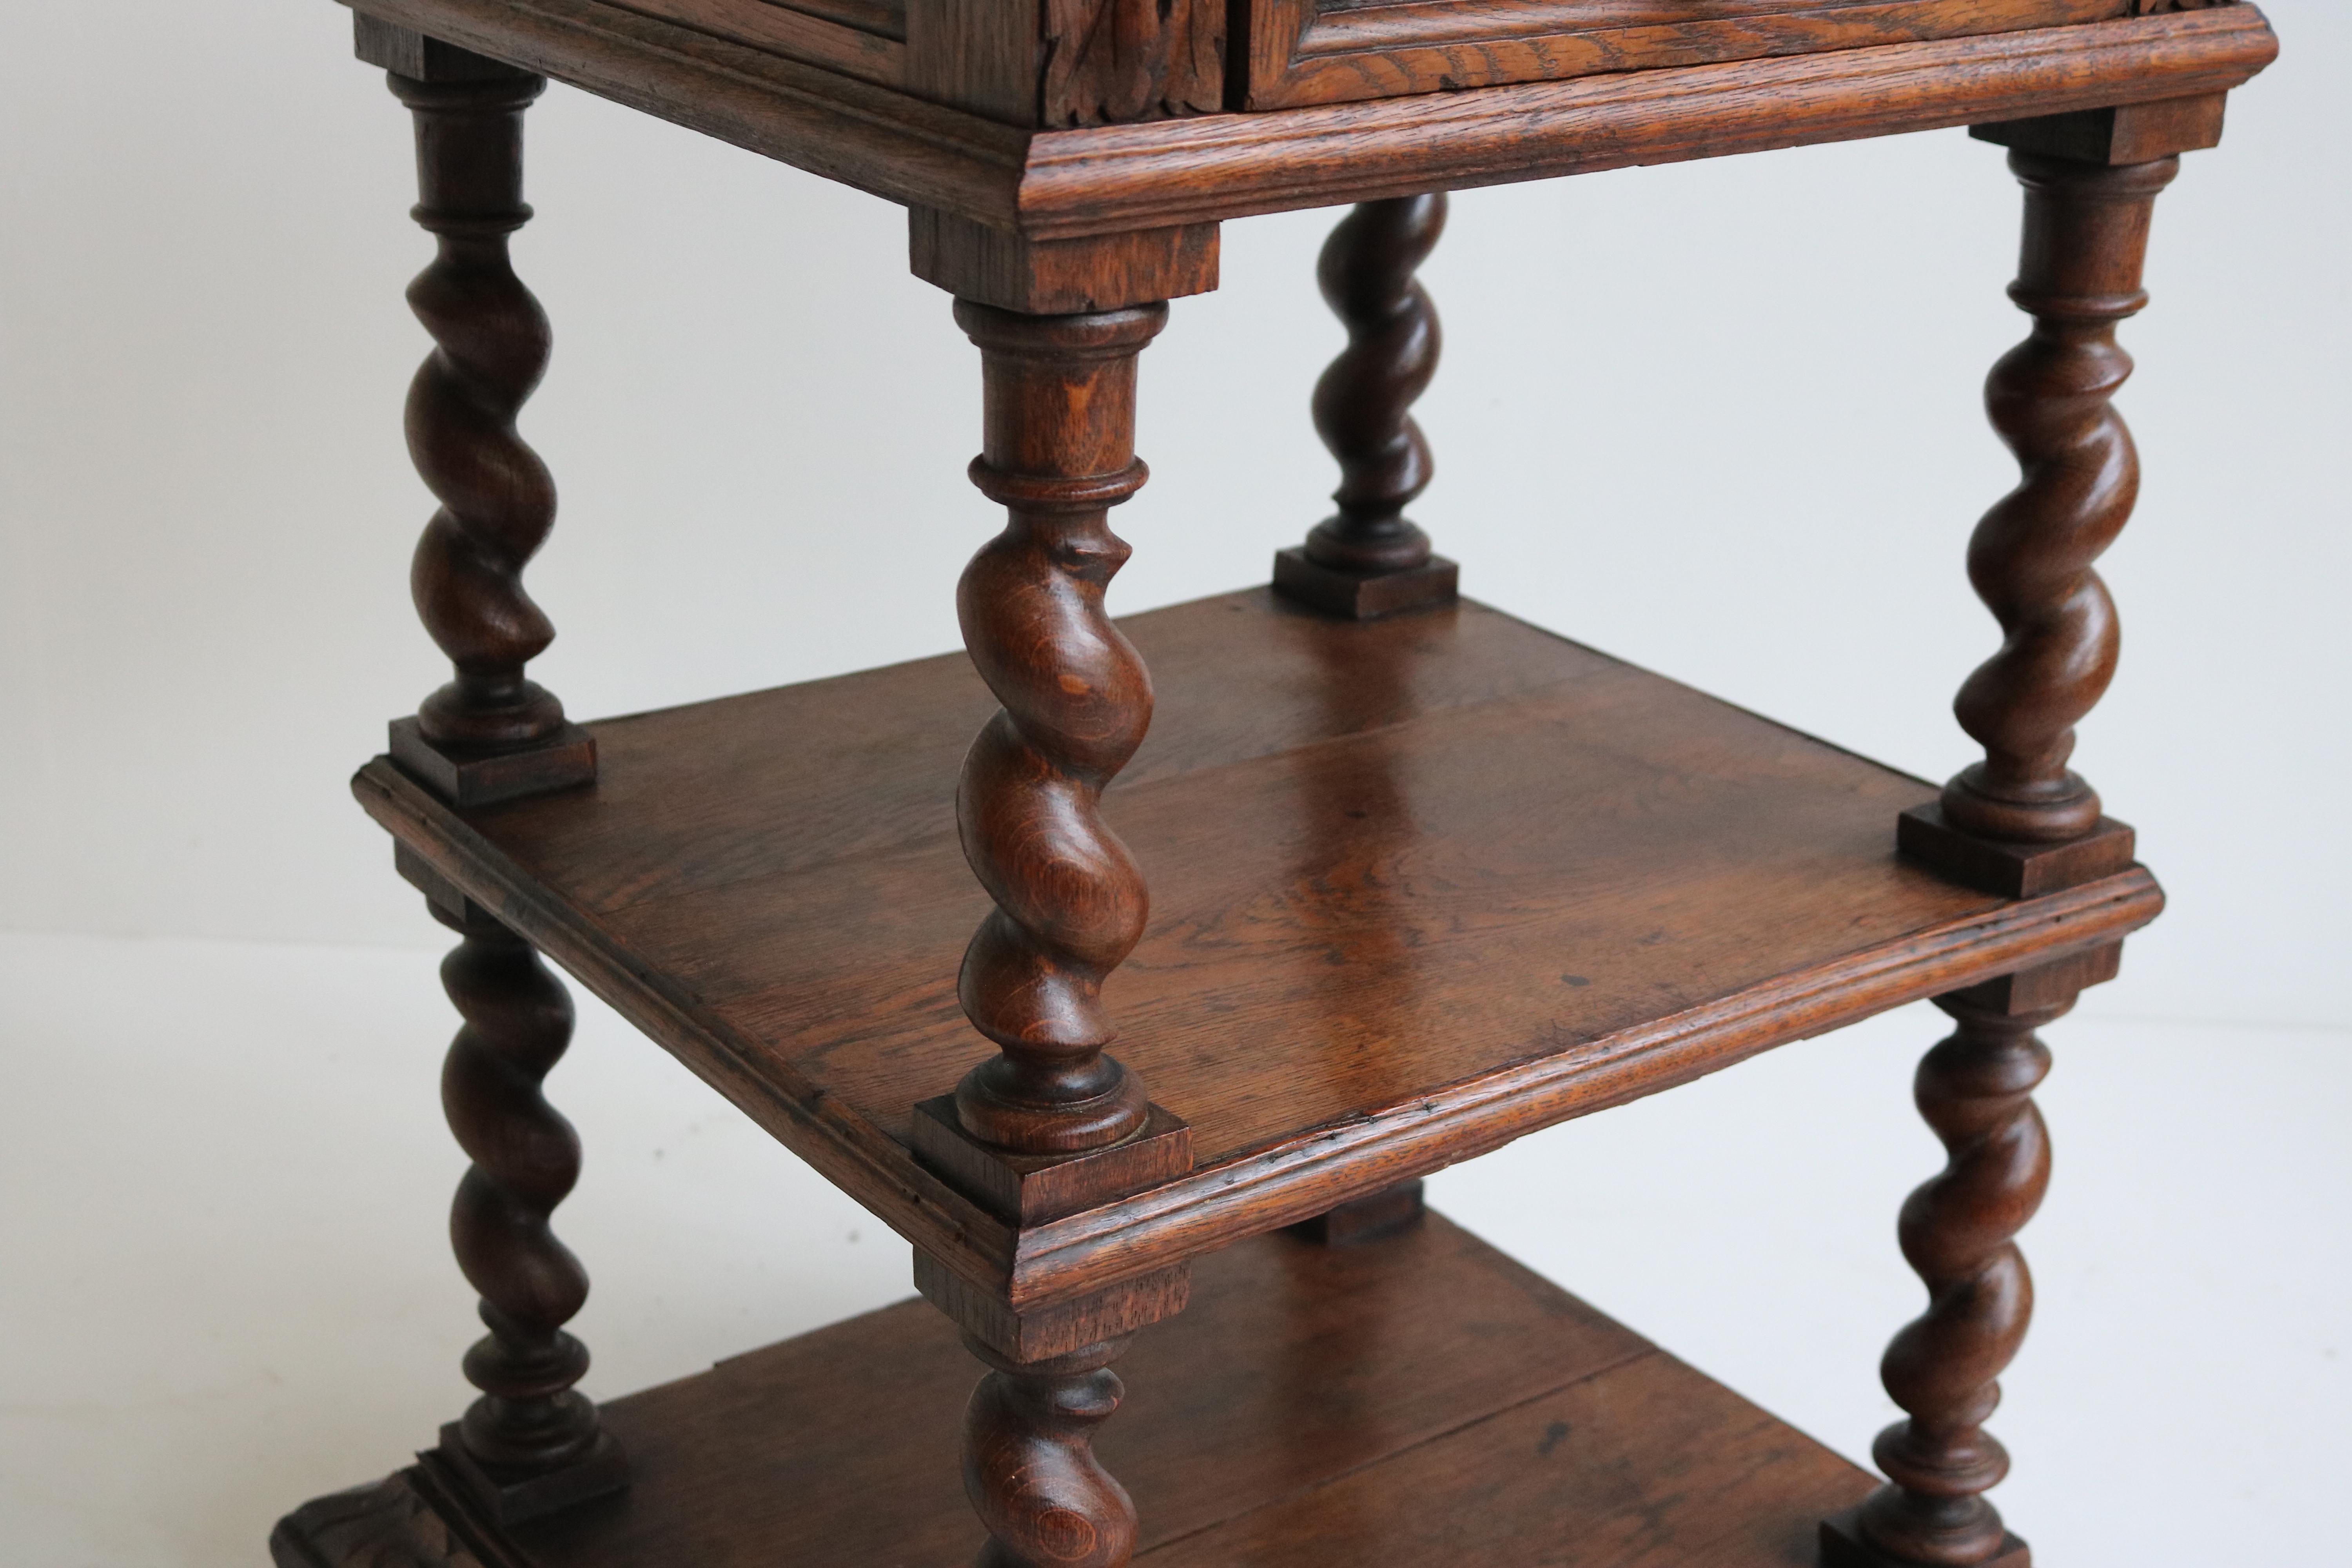 Marvelous 19th century French renaissance Revival Night stand / side table in Hunt / Black Forest style with barley twisted columns.
Finished on all sides so you are able to place this freestanding in your room for use as a nightstand/side table